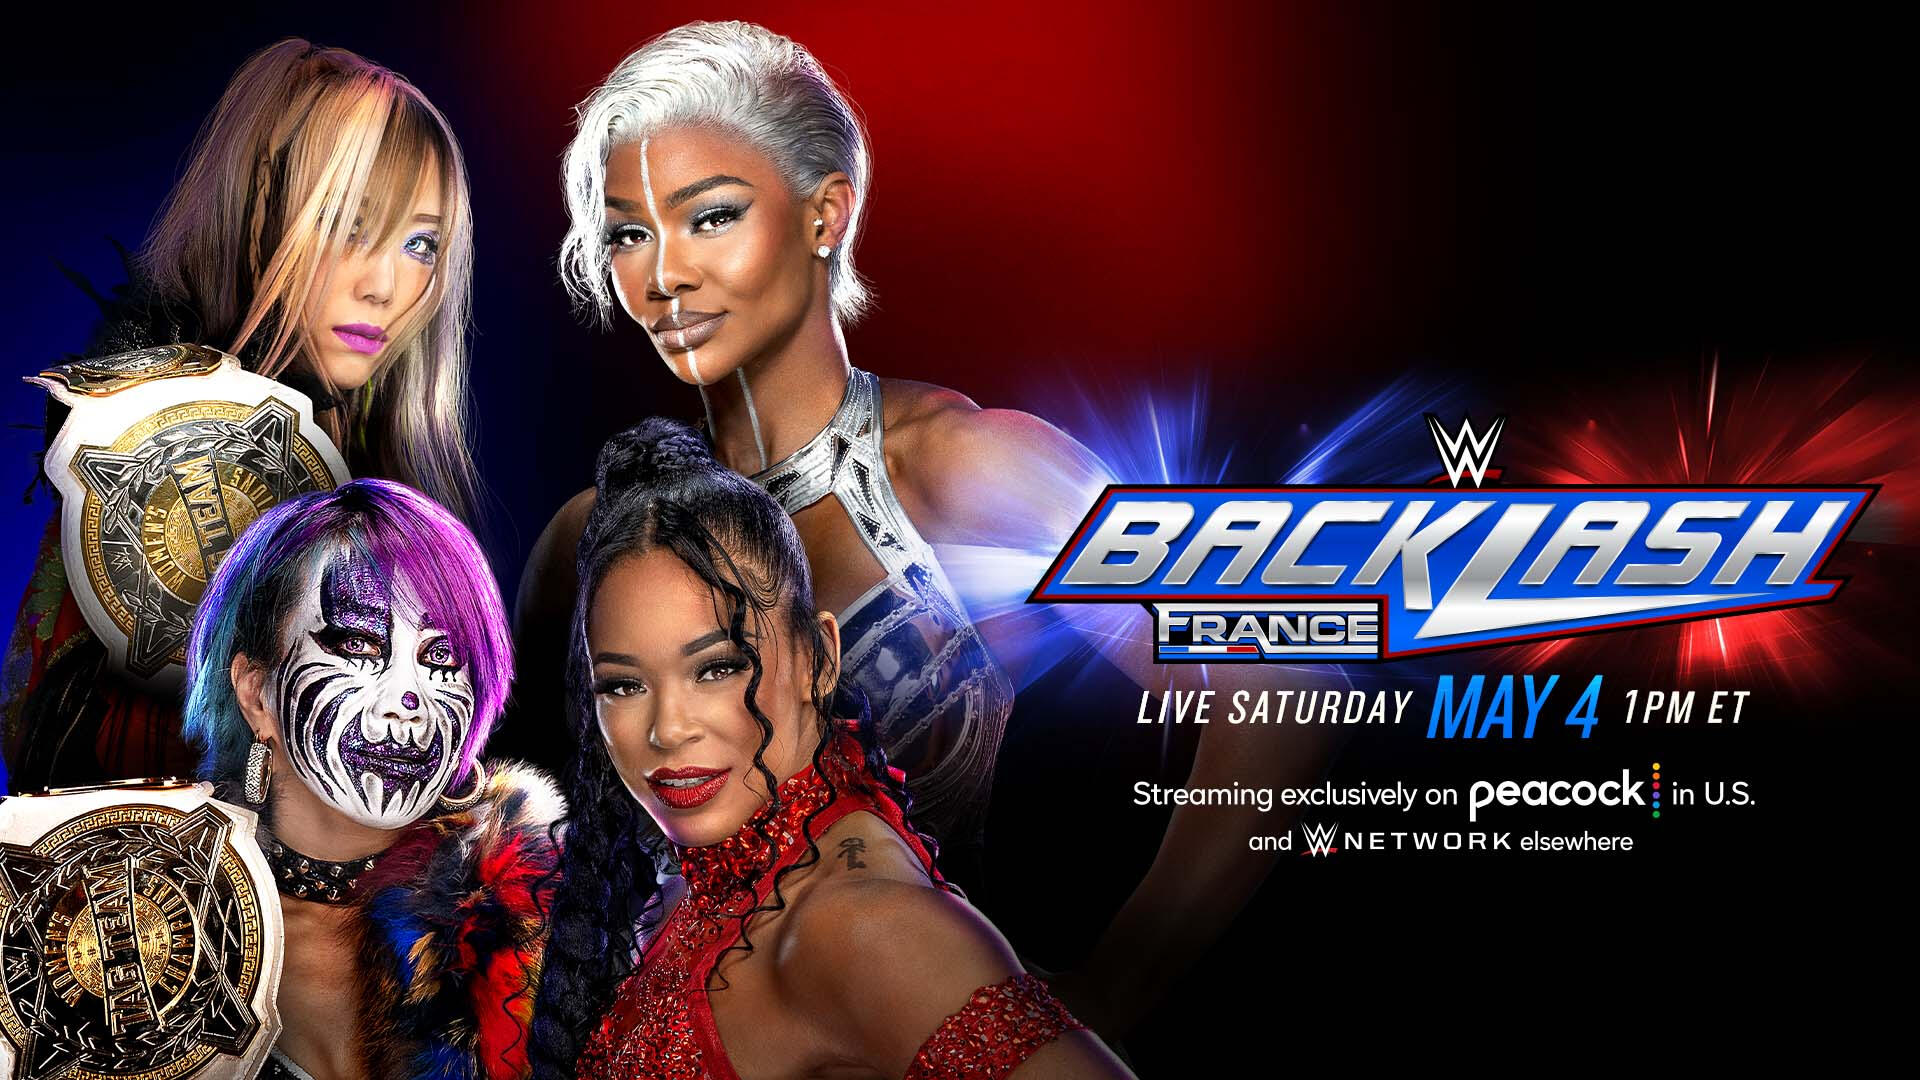 New WWE Women's Tag Team Champions Crowned At WWE Backlash: France